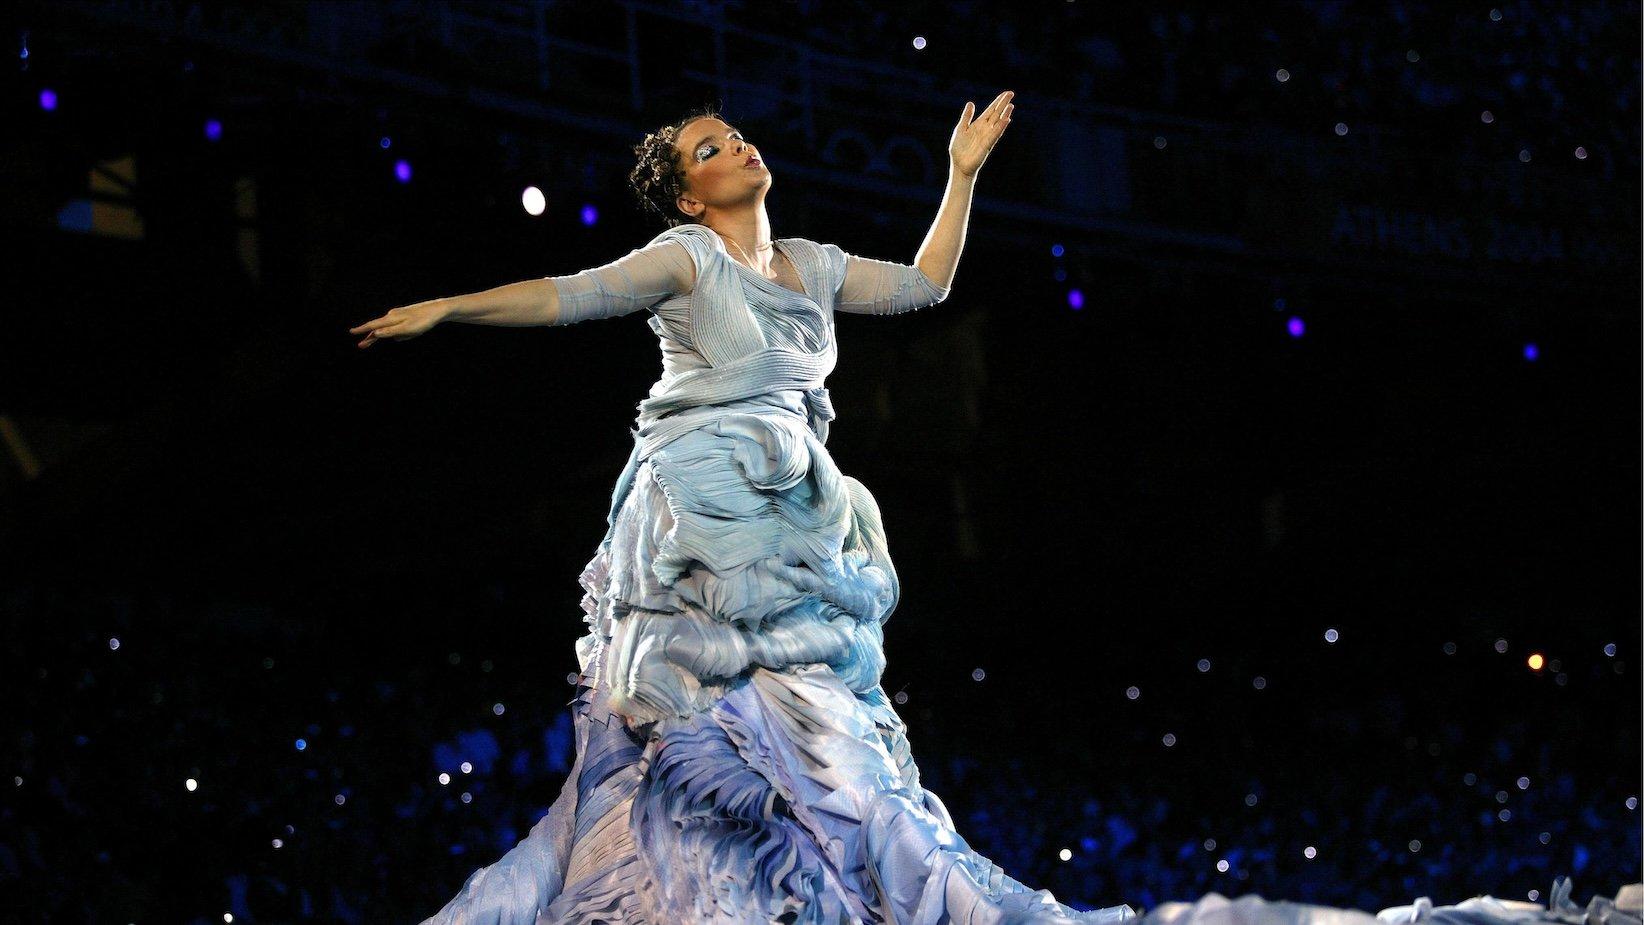 Photo of Bjork performing on stage at the opening of the 2004 Athens Olympics. Bjork is wearing a lavish dress with multiple shades of blue. Her hands are in an L shape in the air.